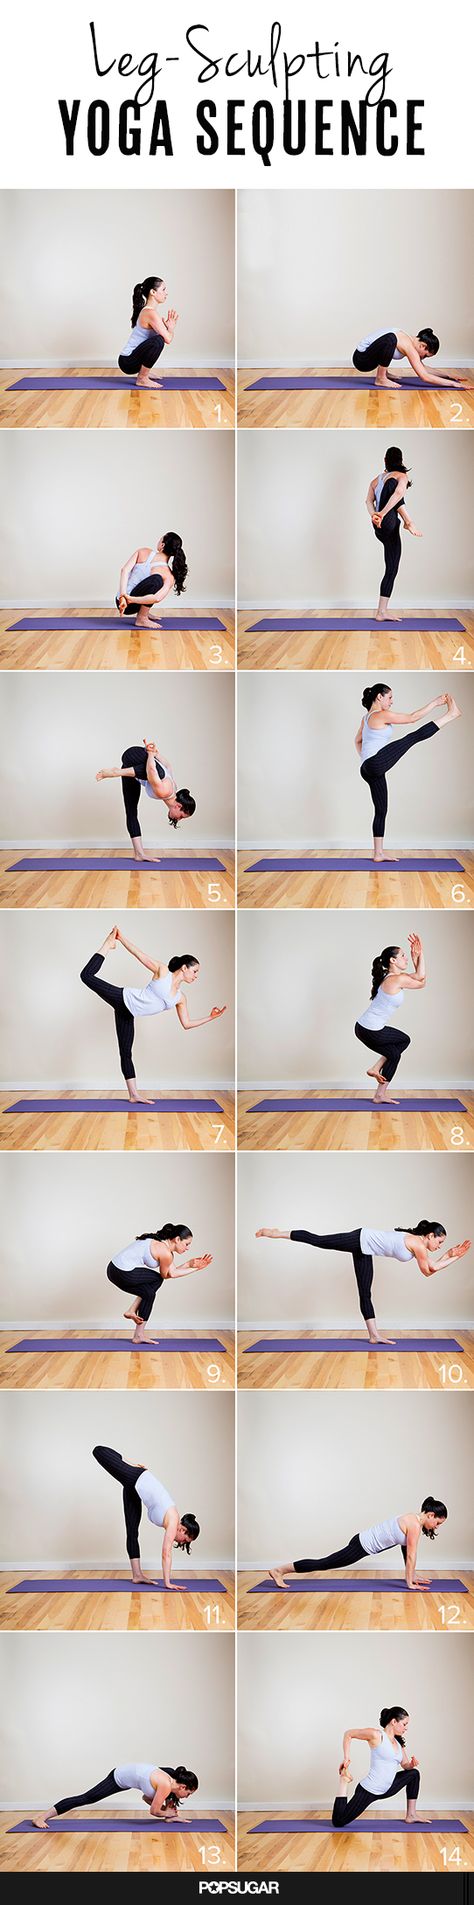 Holy Hot! Yoga Sequence to Do Your Tight Pants Justice